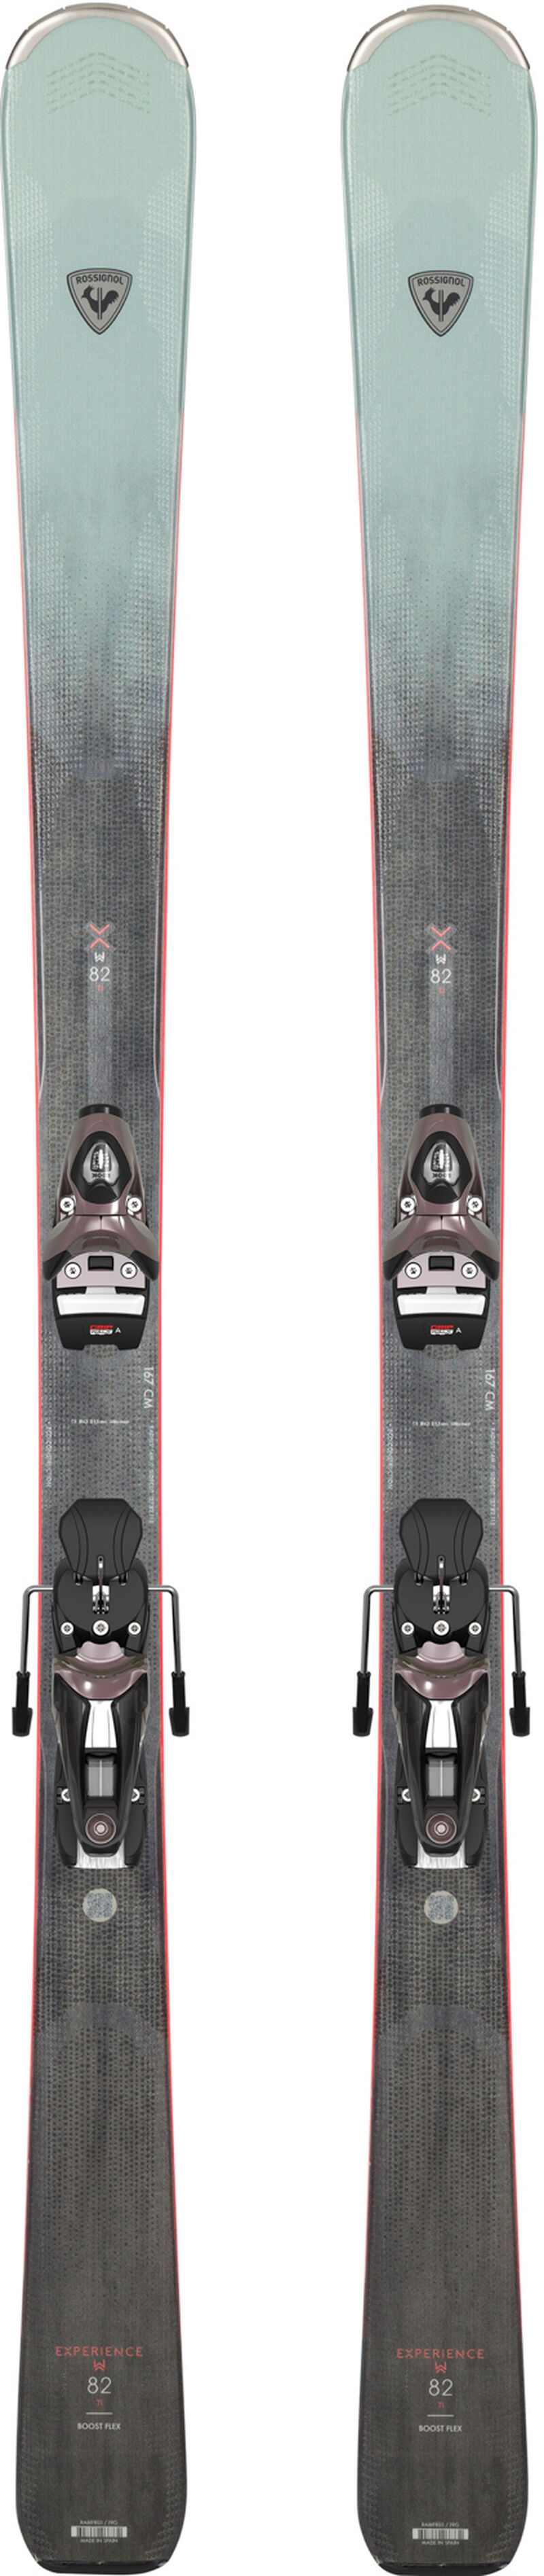 Rossignol Skis All Mountain femme EXPERIENCE W 82 Ti (OPEN) 